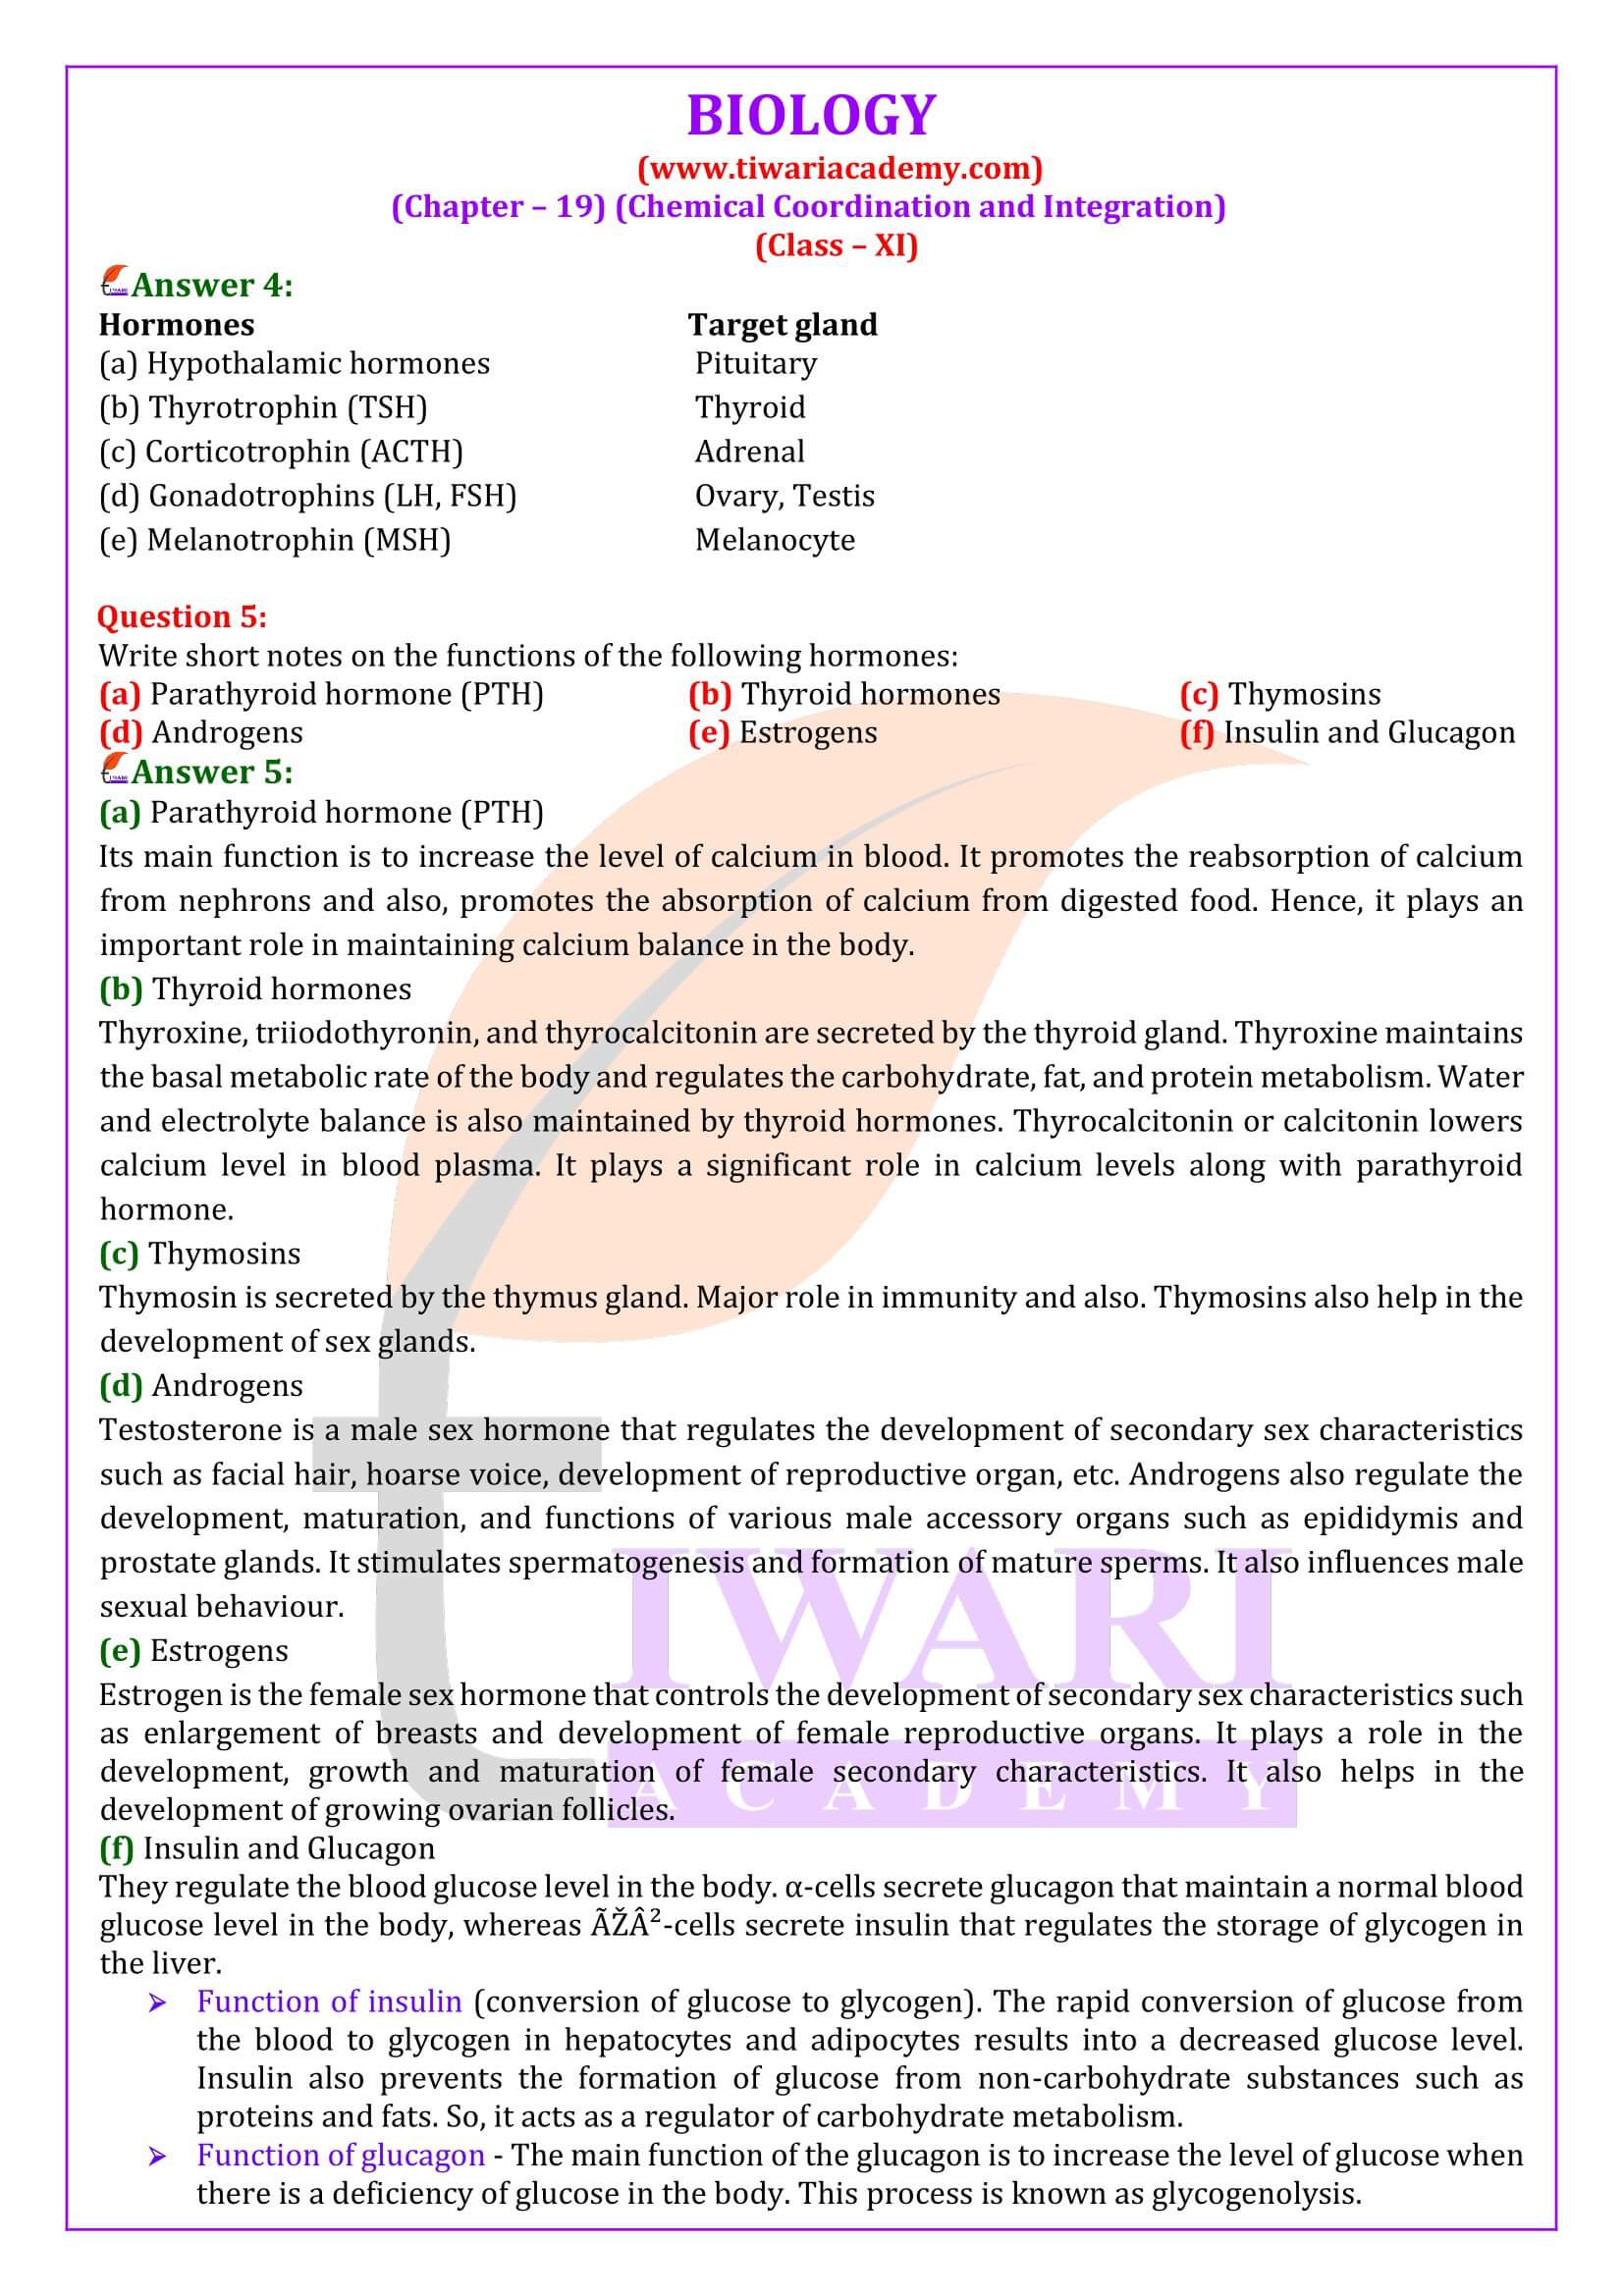 NCERT Solutions for Class 11 Biology Chapter 19 in English Medium